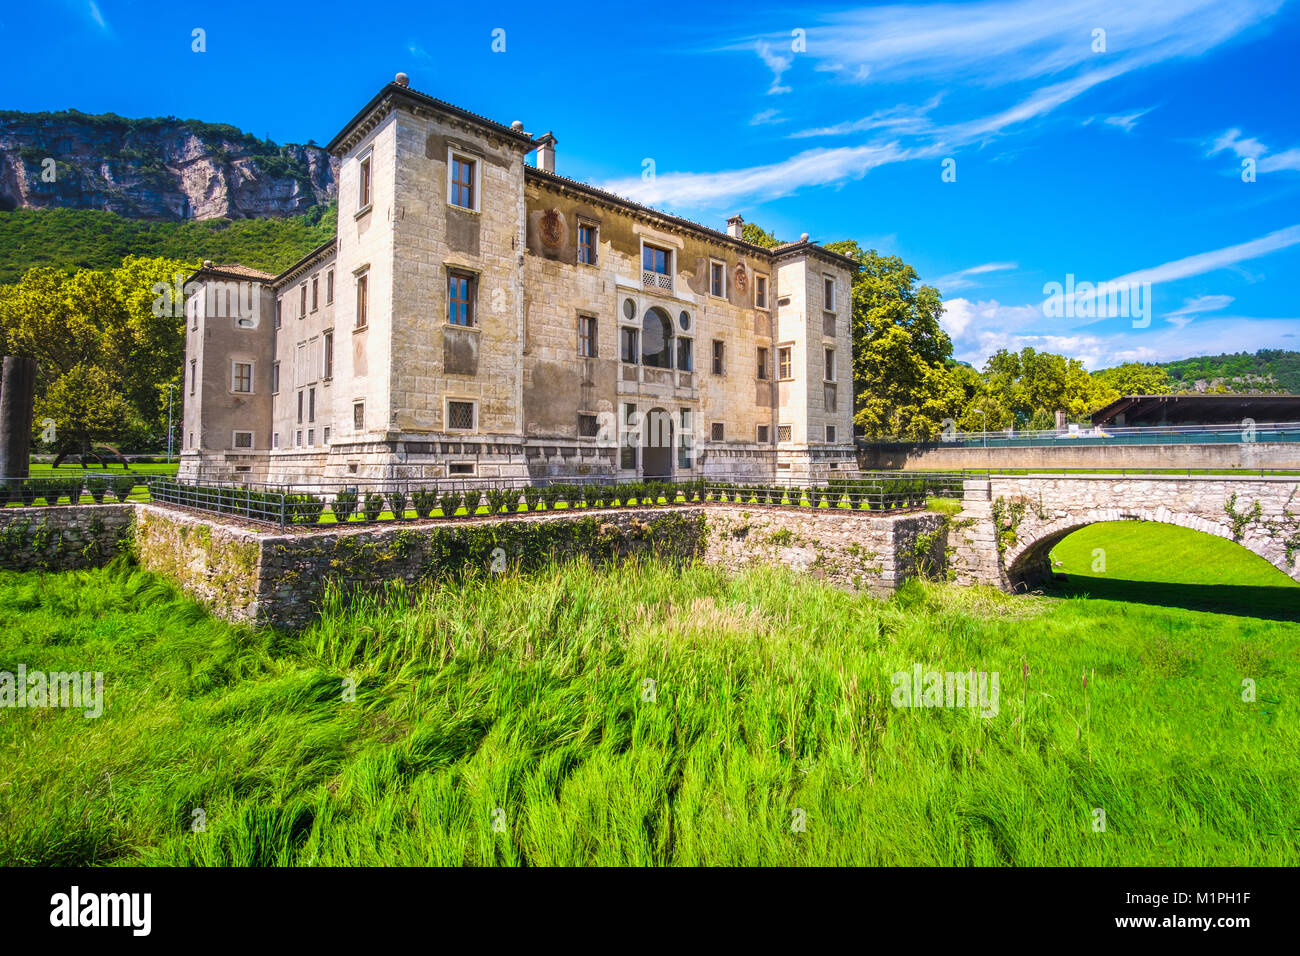 castle moat fosse dry grass Albere palace in Trento Trentino Italy Stock Photo